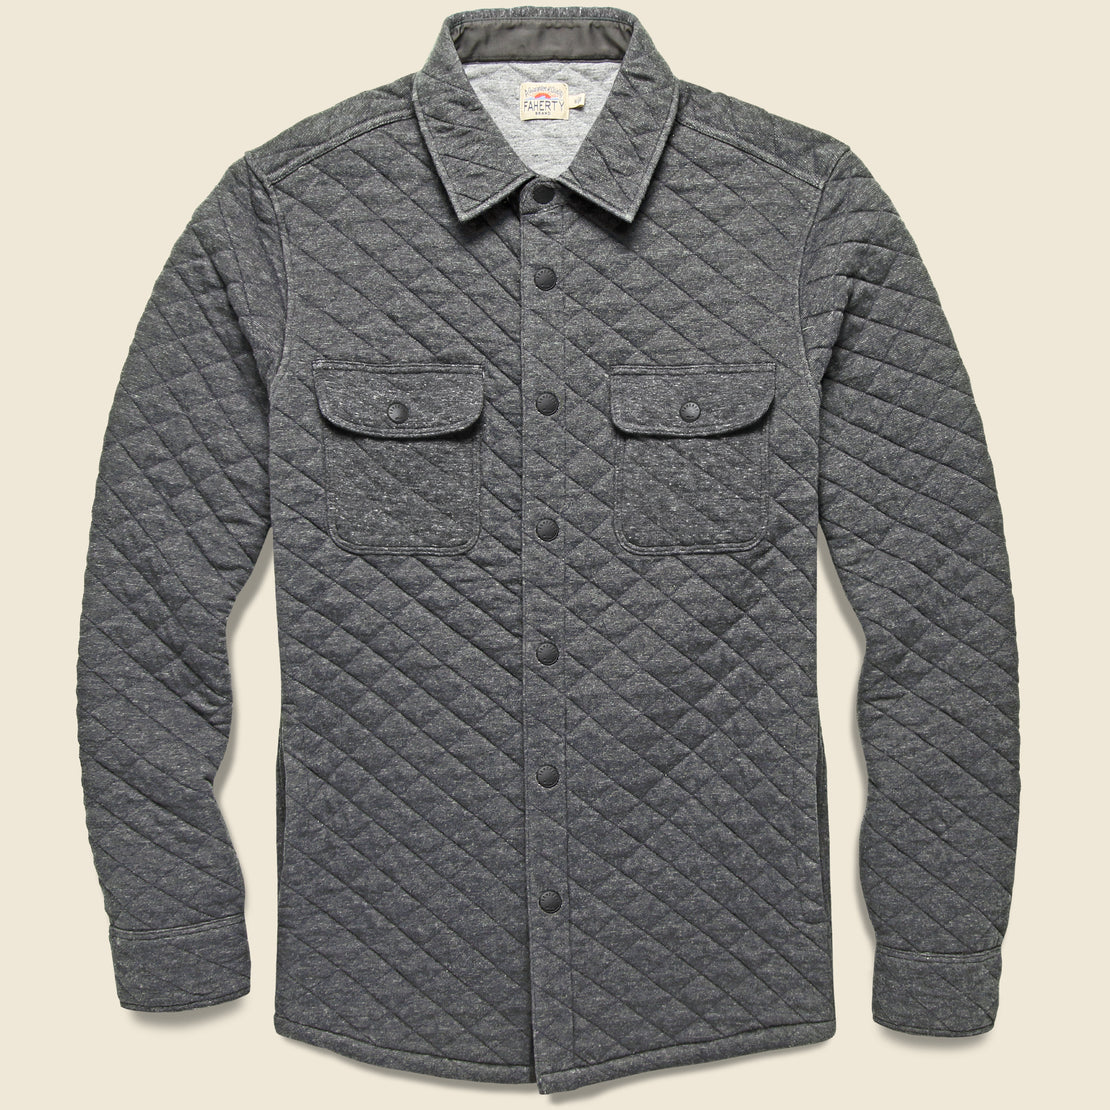 Faherty Epic Quilted Fleece CPO Shirt Jacket - Charcoal Heather